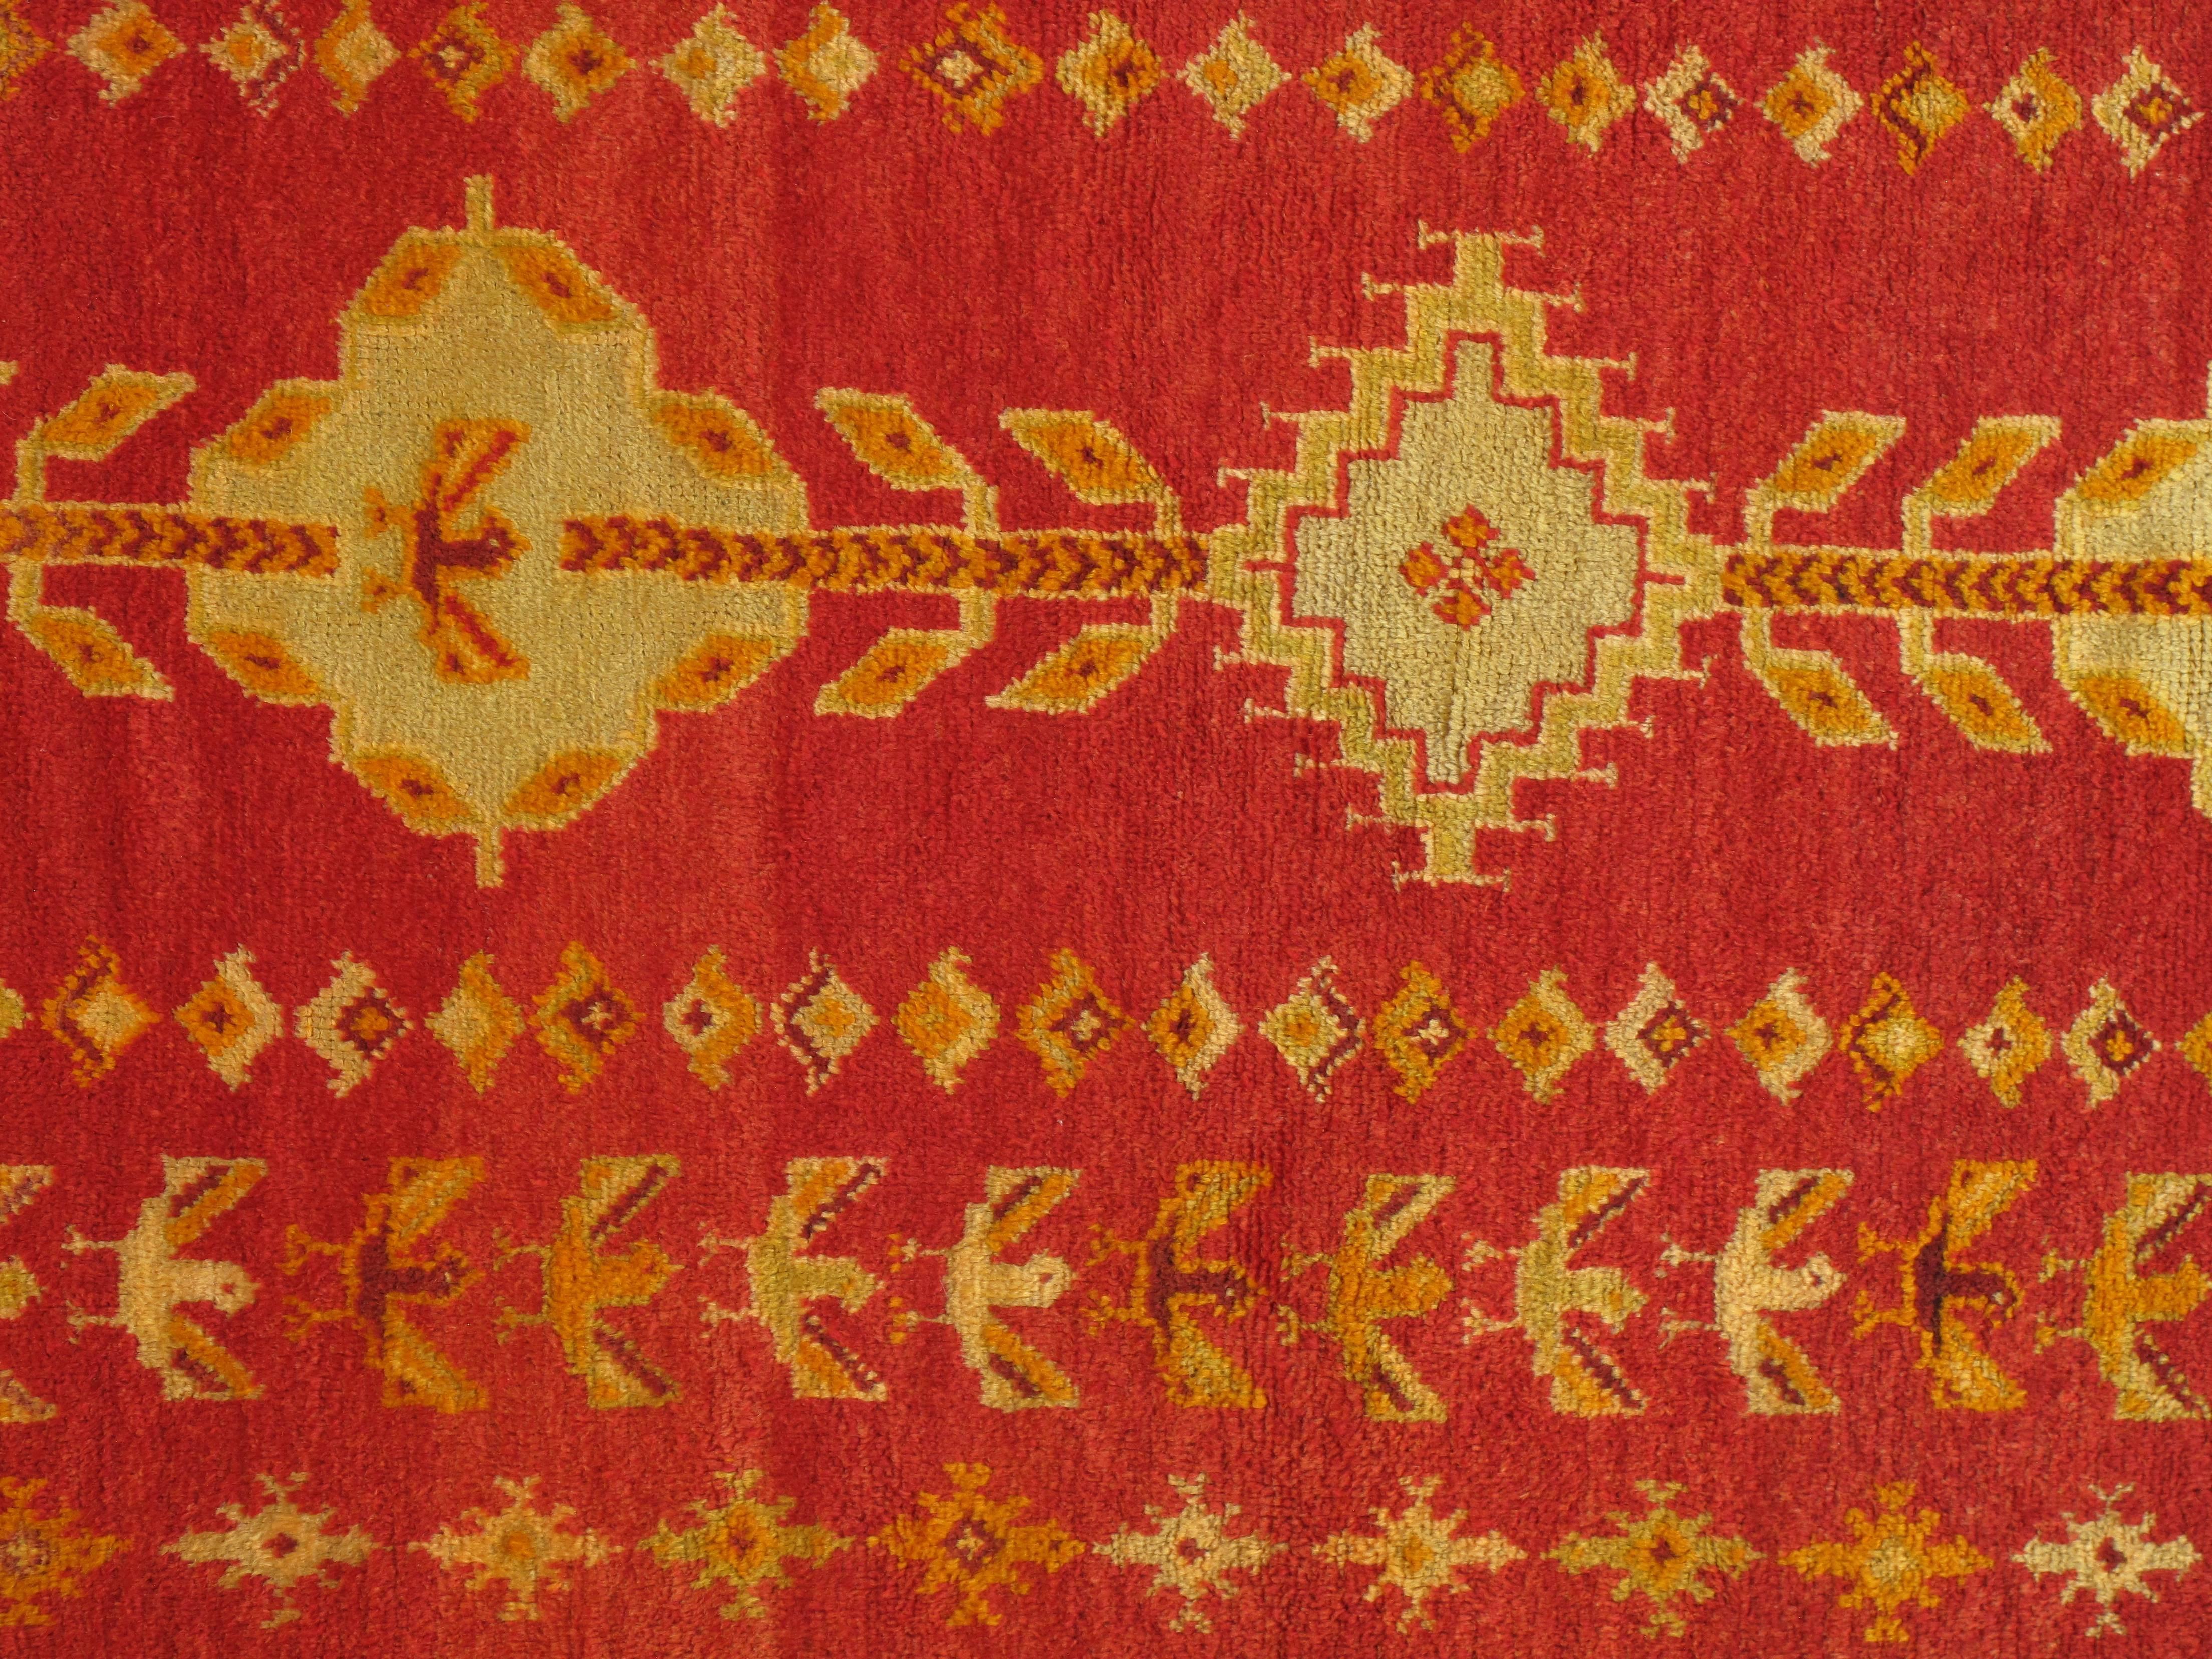 Vintage Moroccan rug, hand-knotted in wool with repeating border motifs on a red field. Measures: 5'6